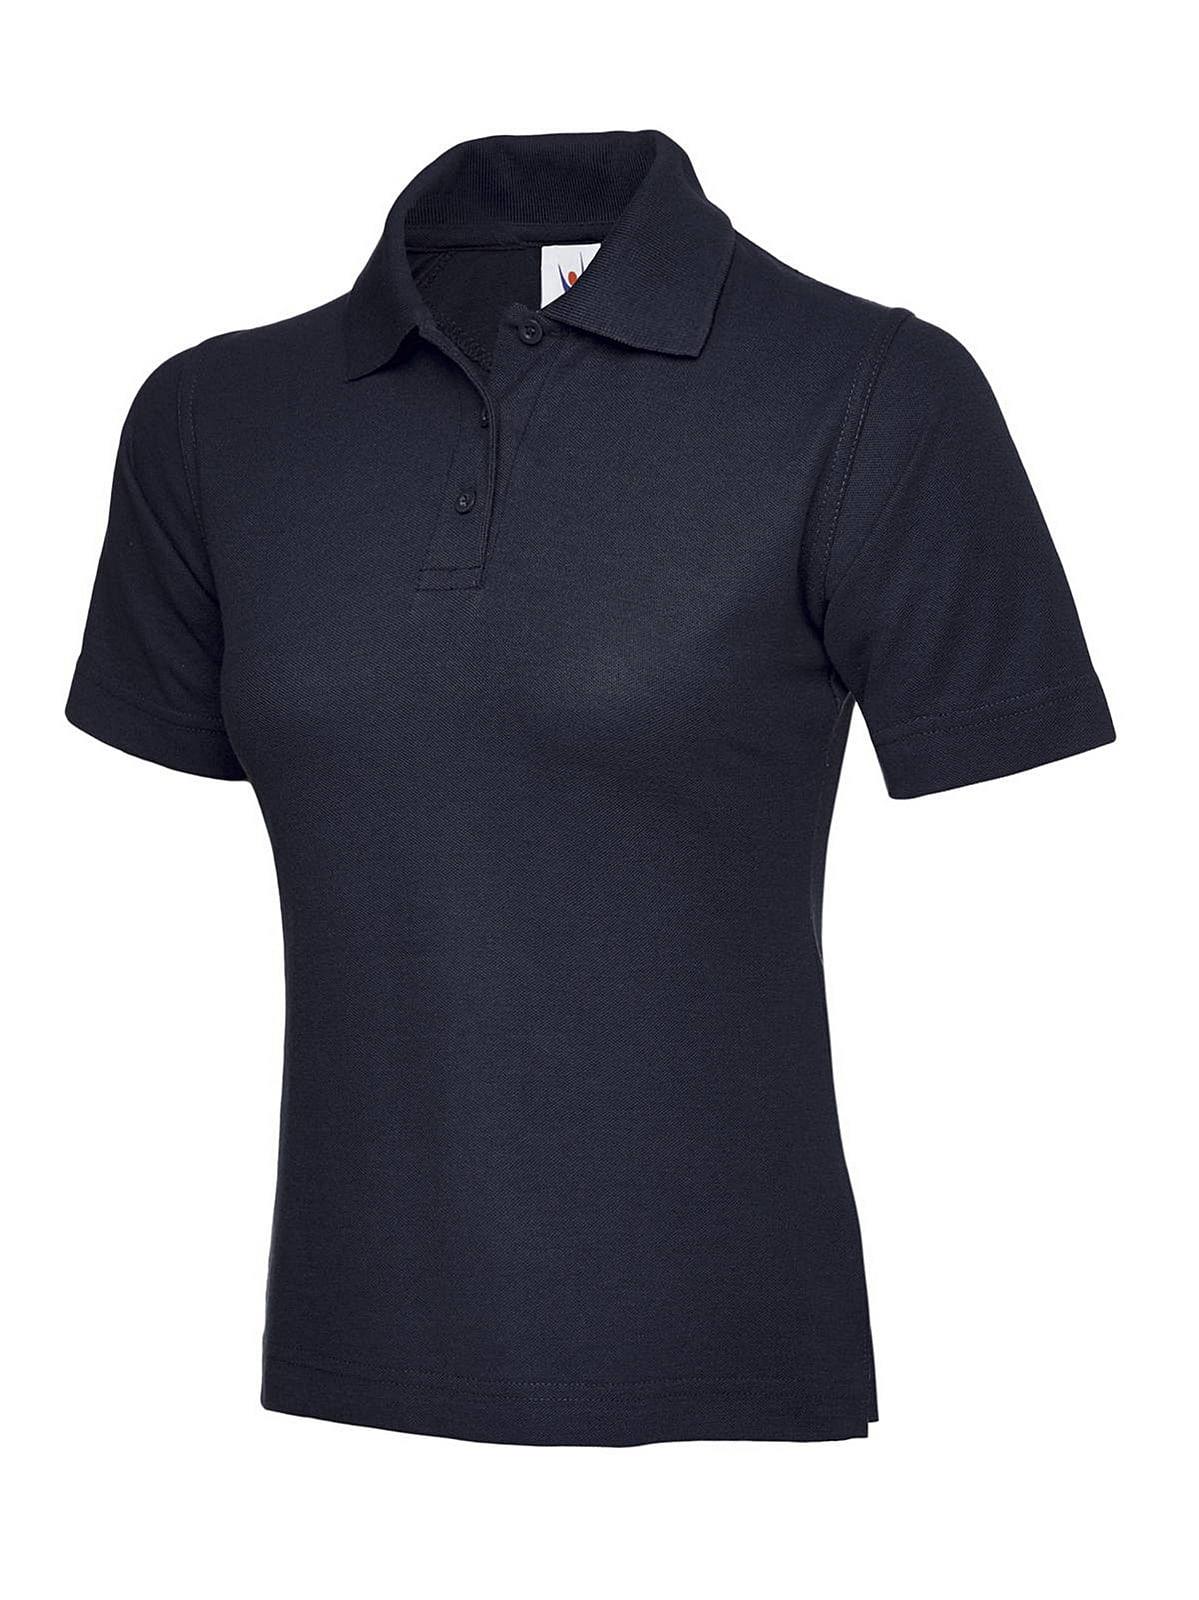 Uneek 220GSM Womens Polo Shirt in Navy (Product Code: UC106)